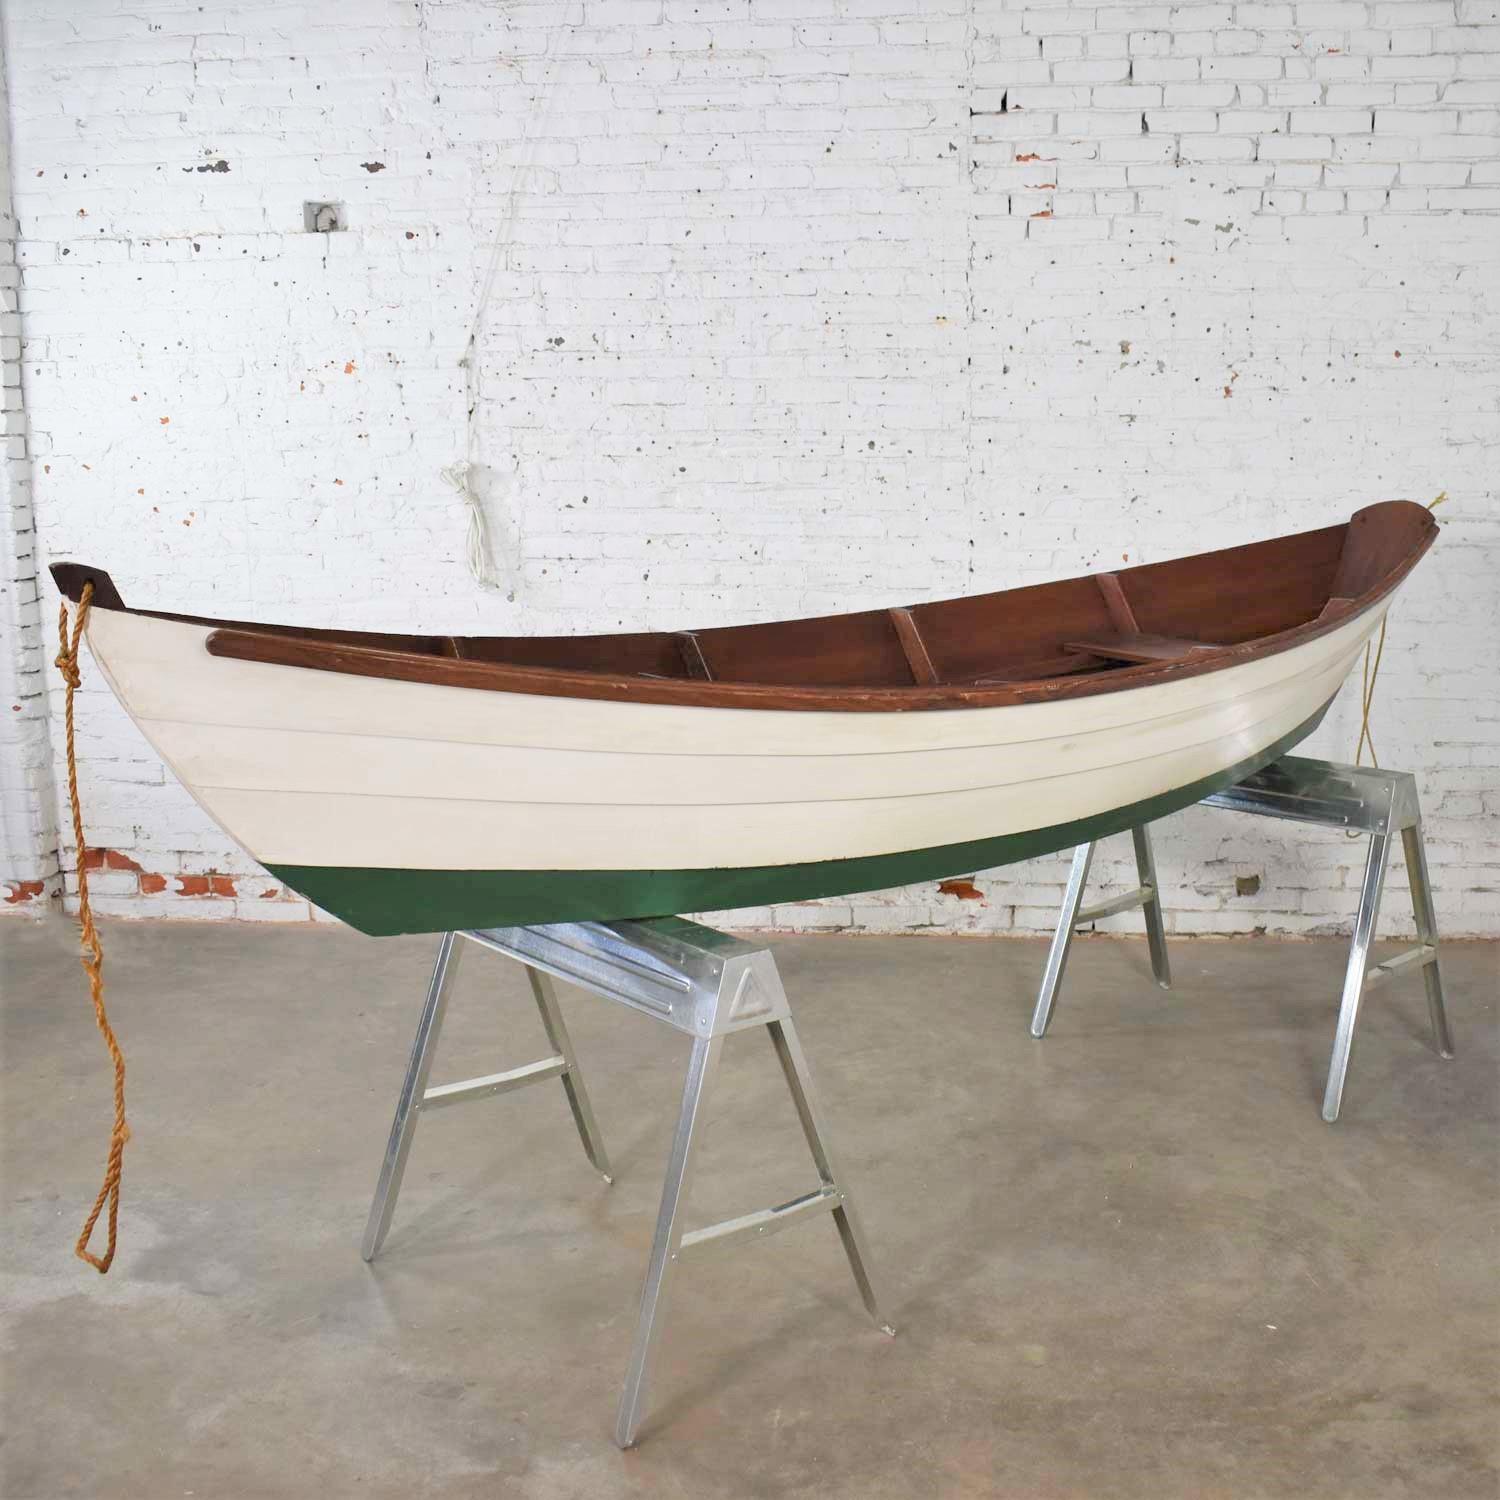 20th Century Vintage Wooden Rowboat for Maritime or Nautical Décor